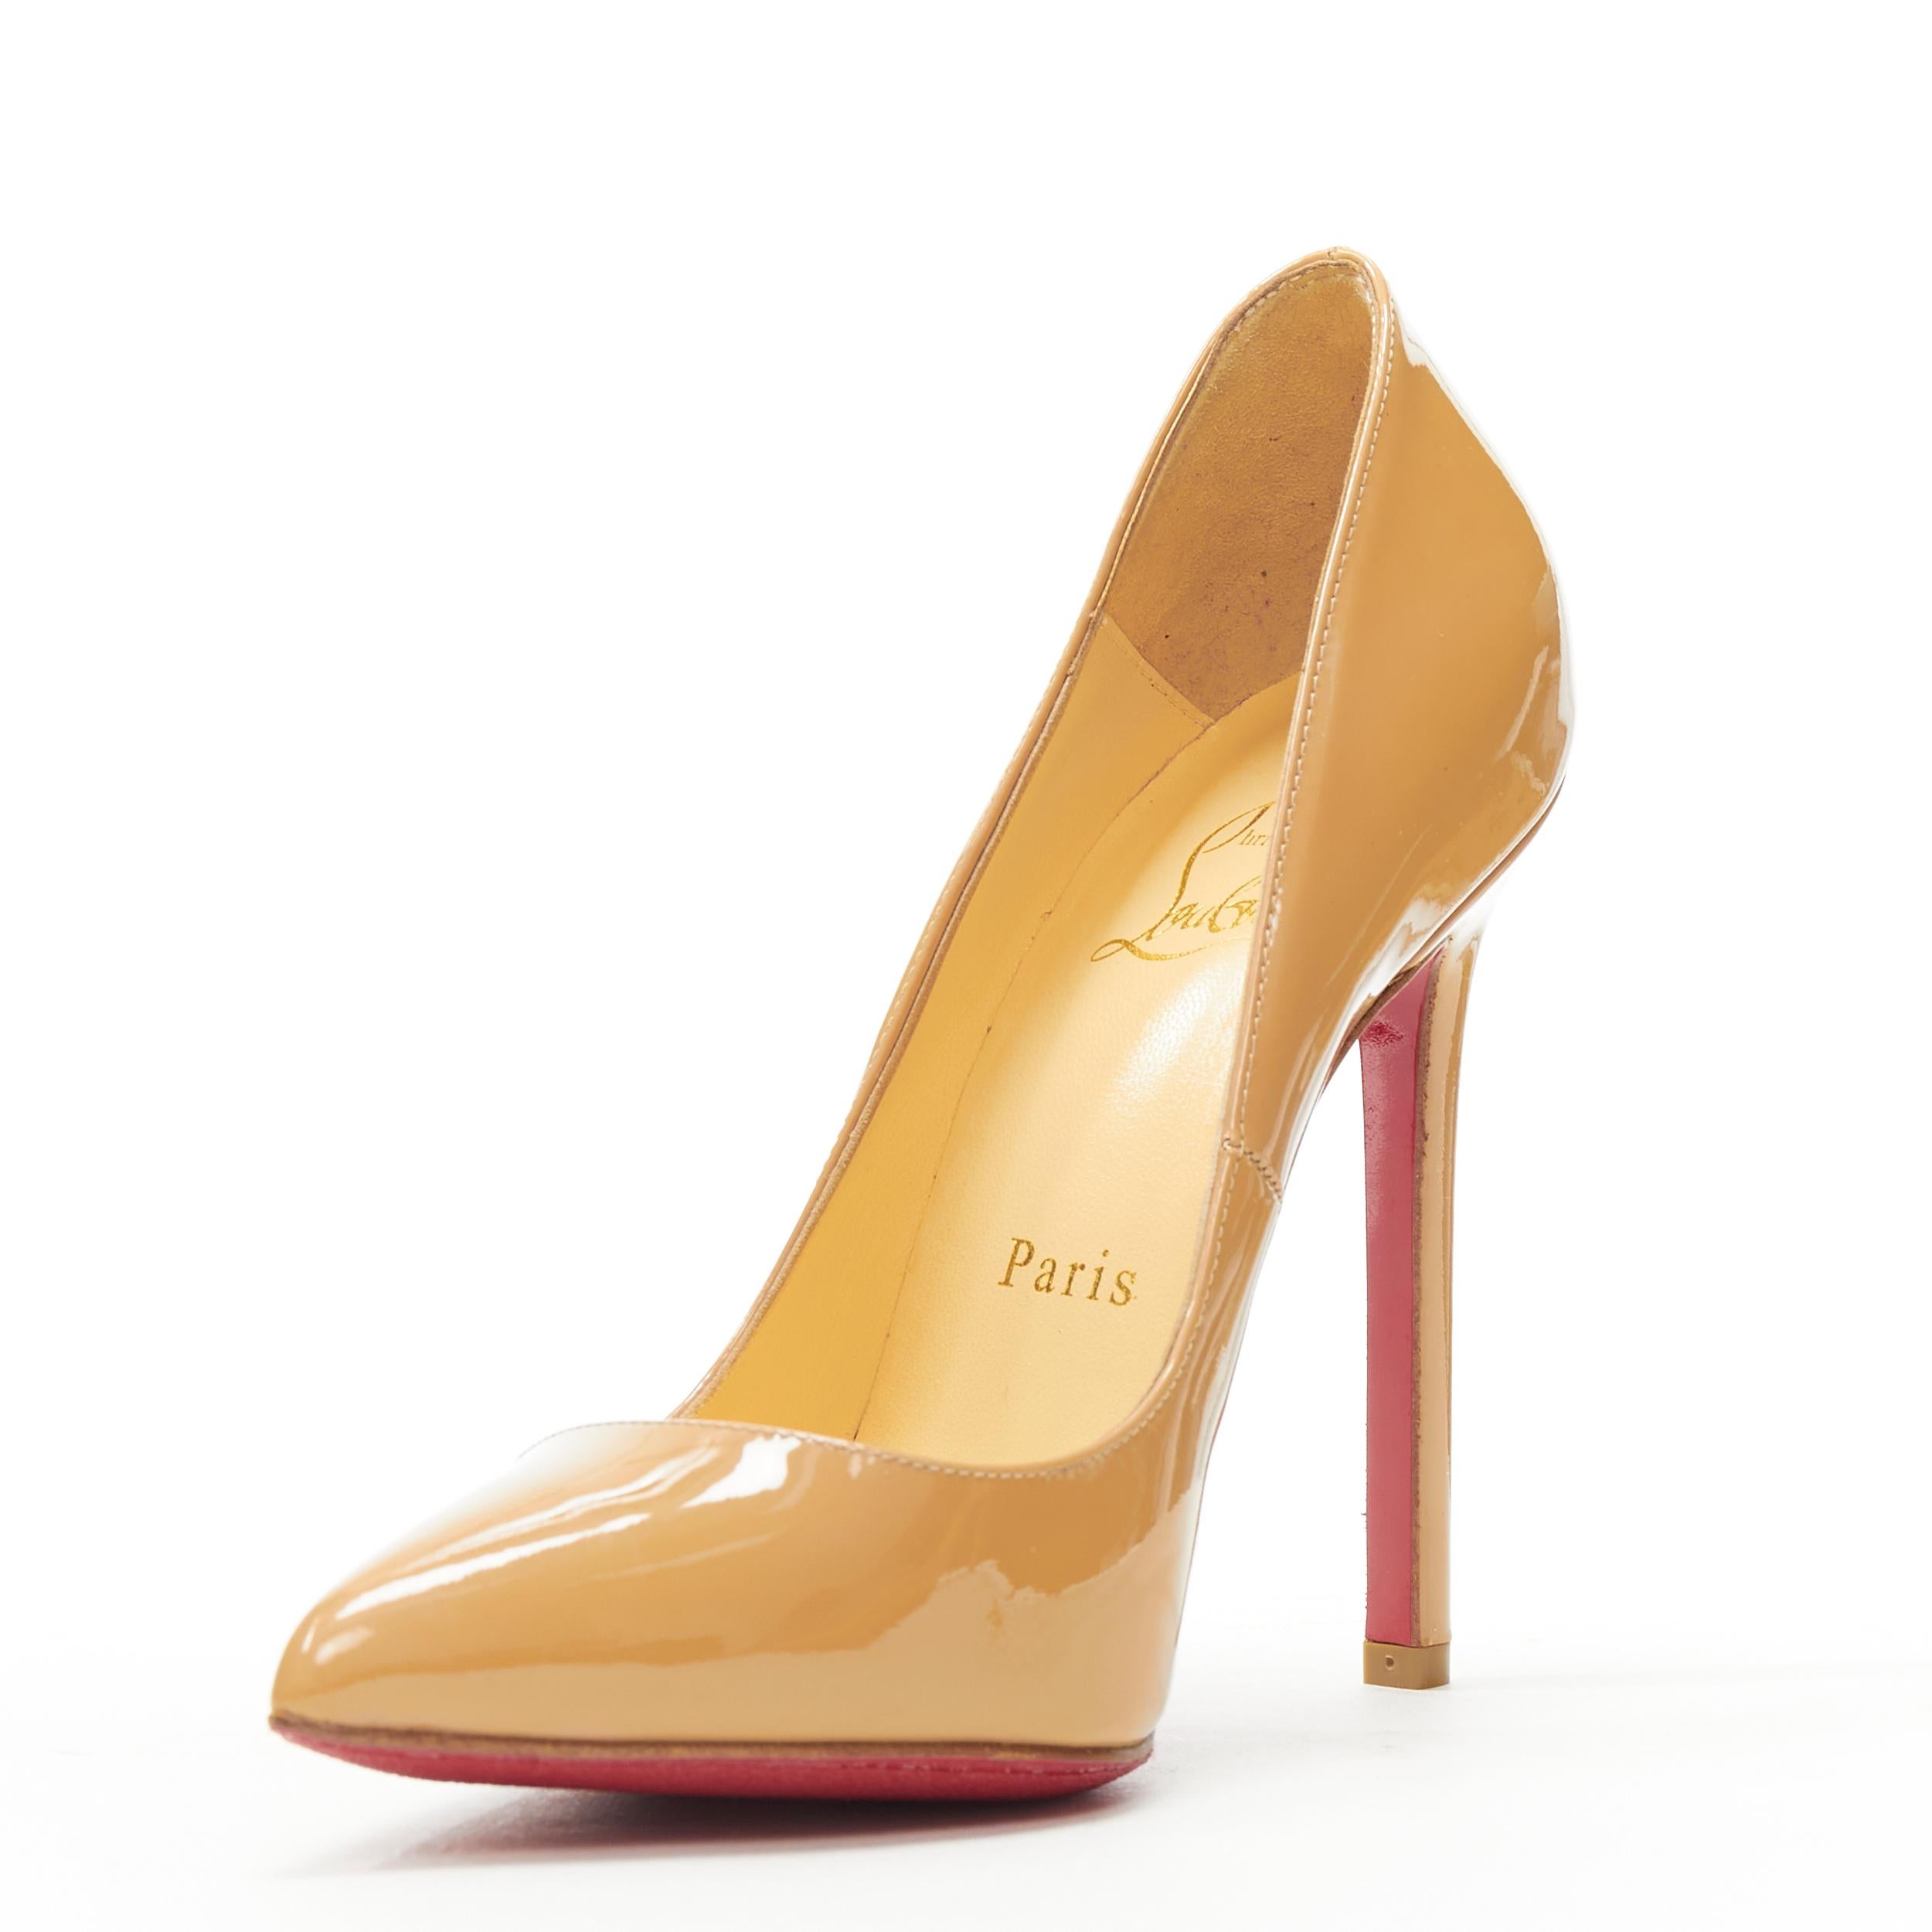 pigalle 120 louboutin